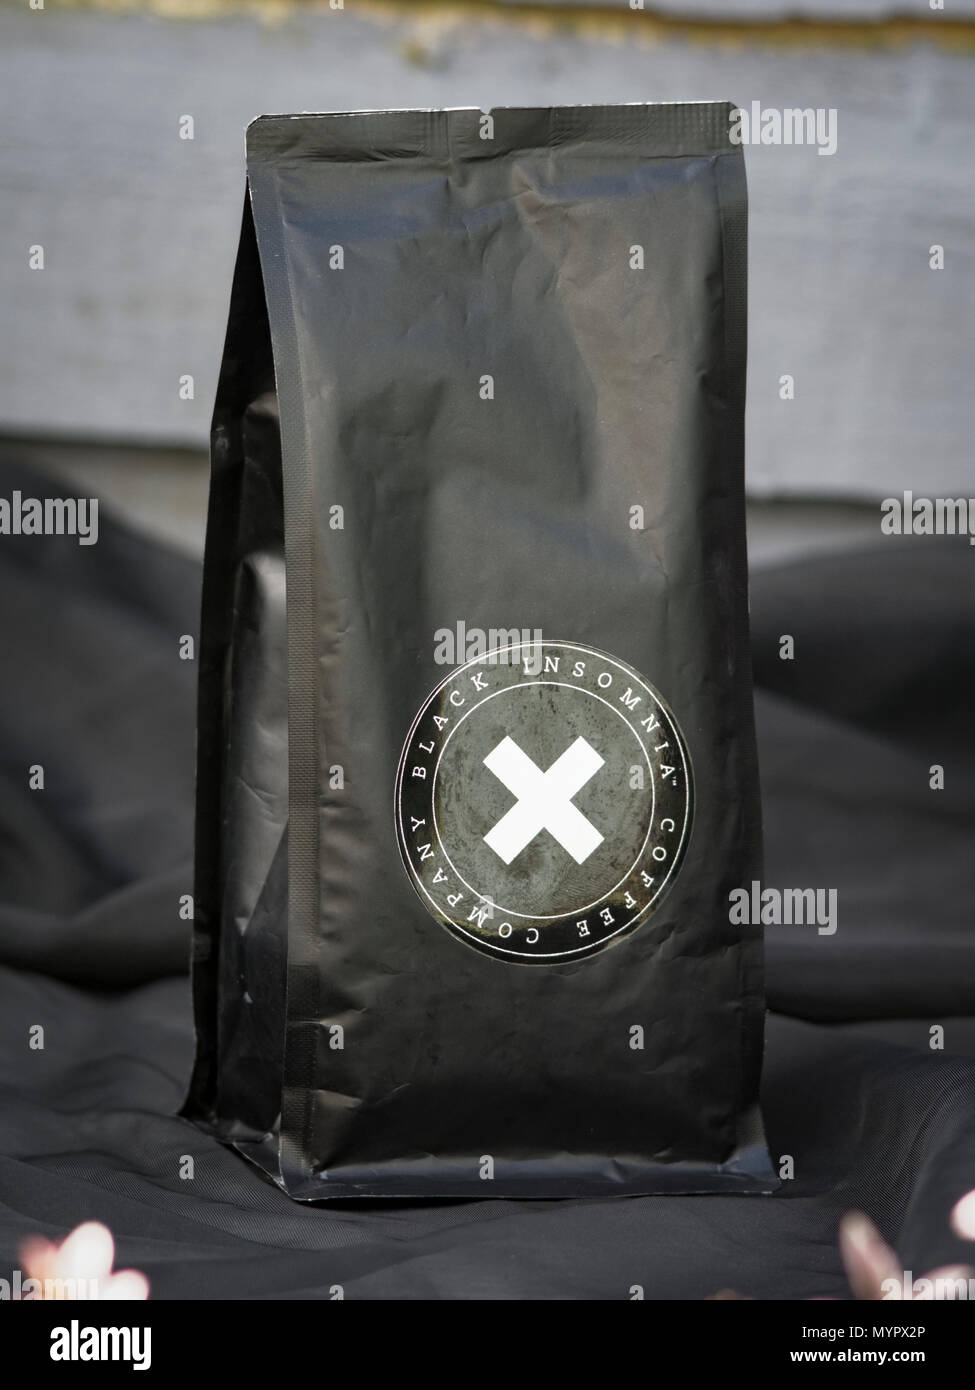 Black Insomnia Coffee Company, The World's Strongest Coffee contains 702 milligrams of caffeine per cup, Made in Delaware, USA Stock Photo